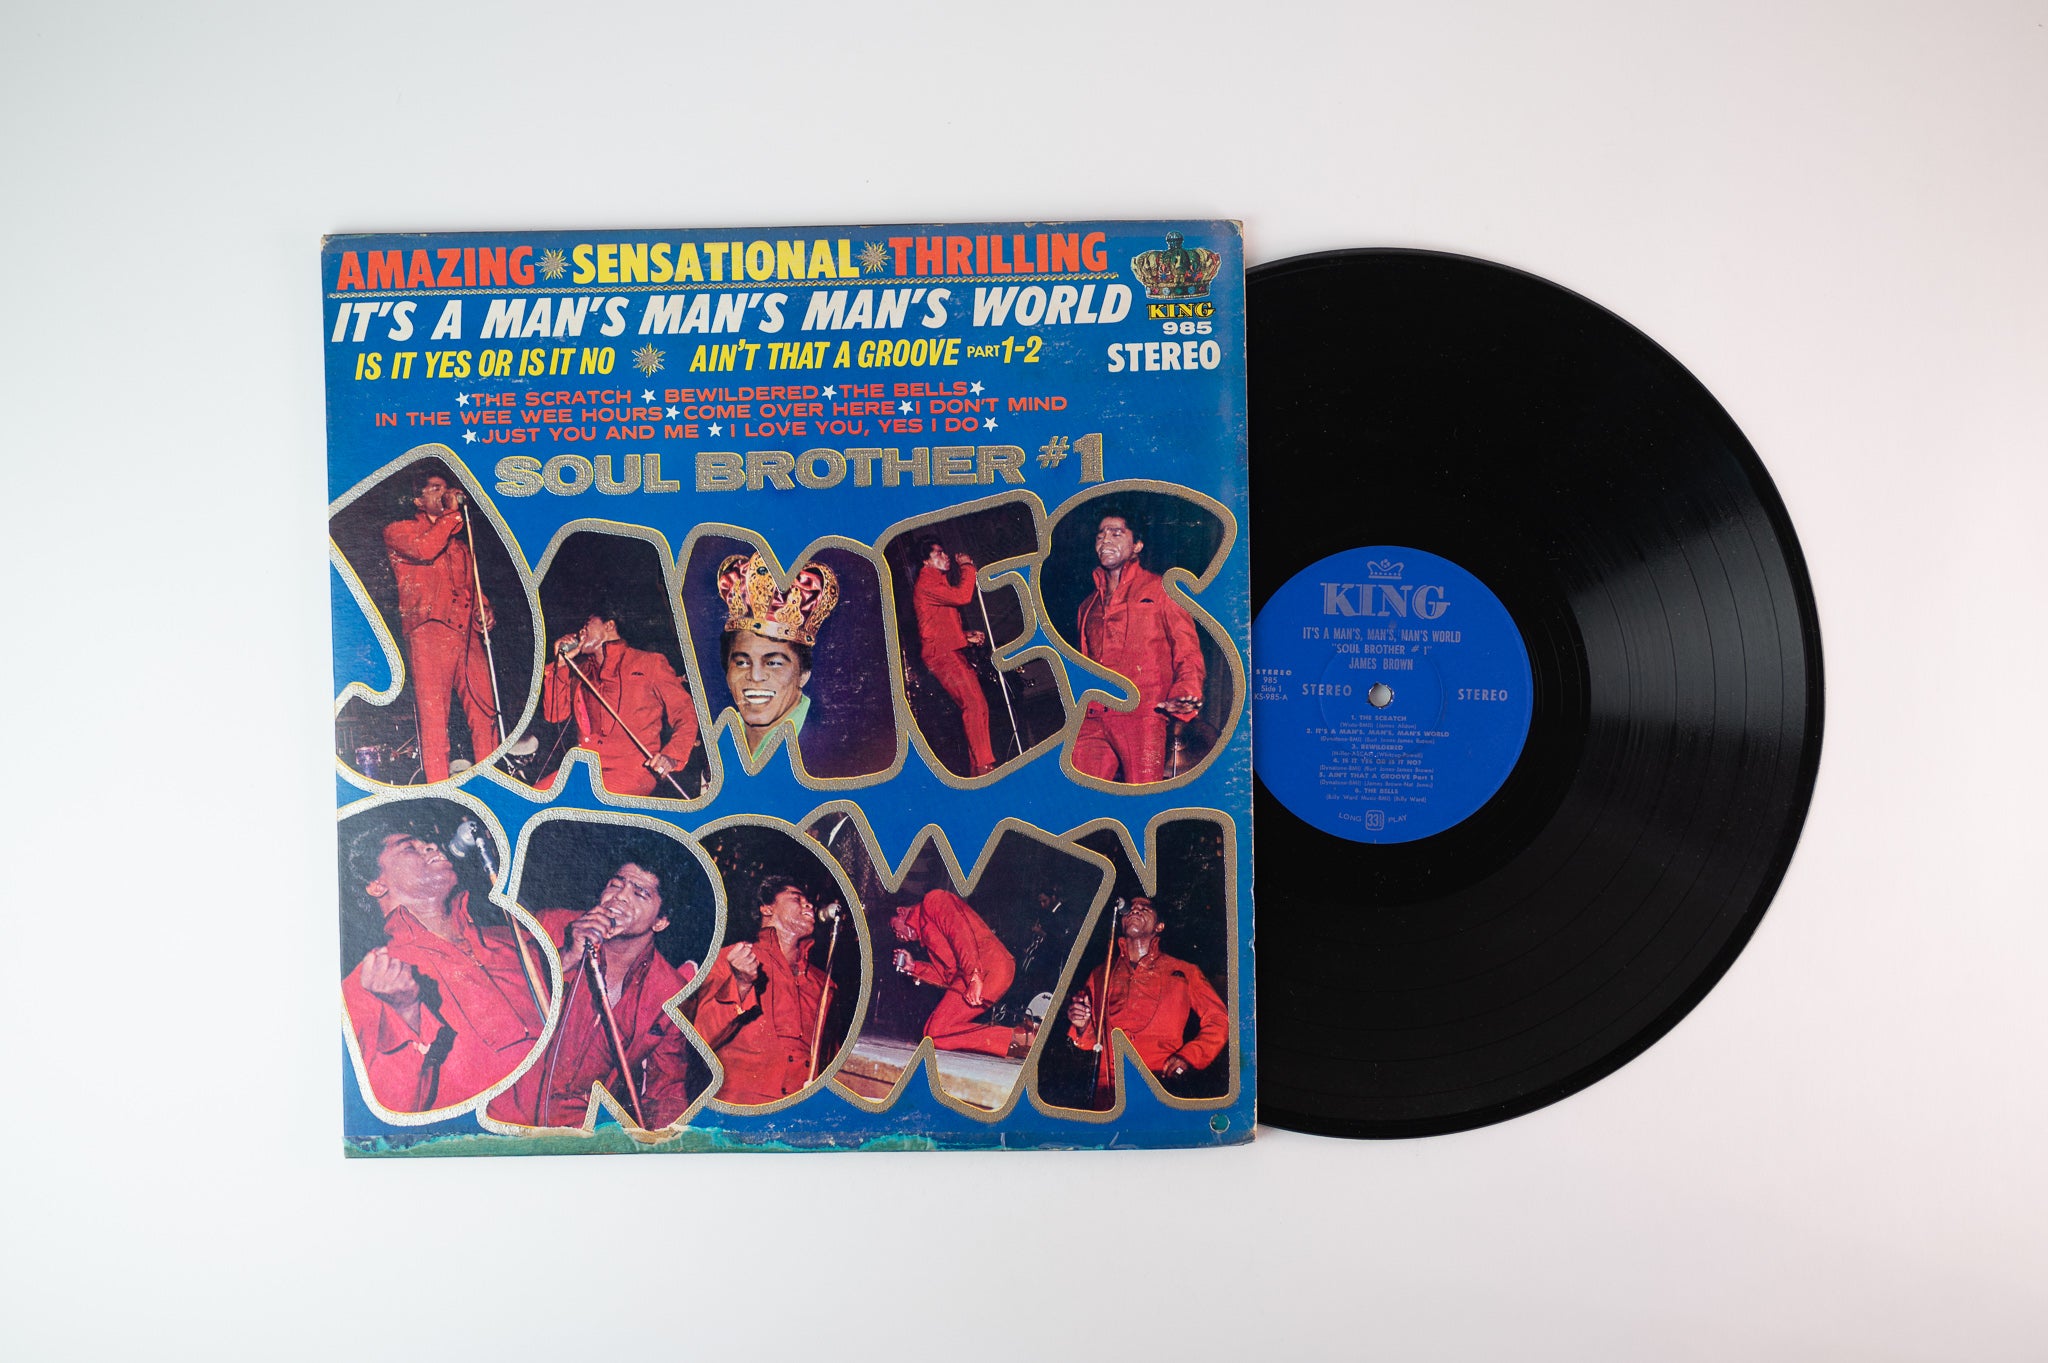 James Brown - It's A Man's Man's World: Soul Brother #1 on King Stereo